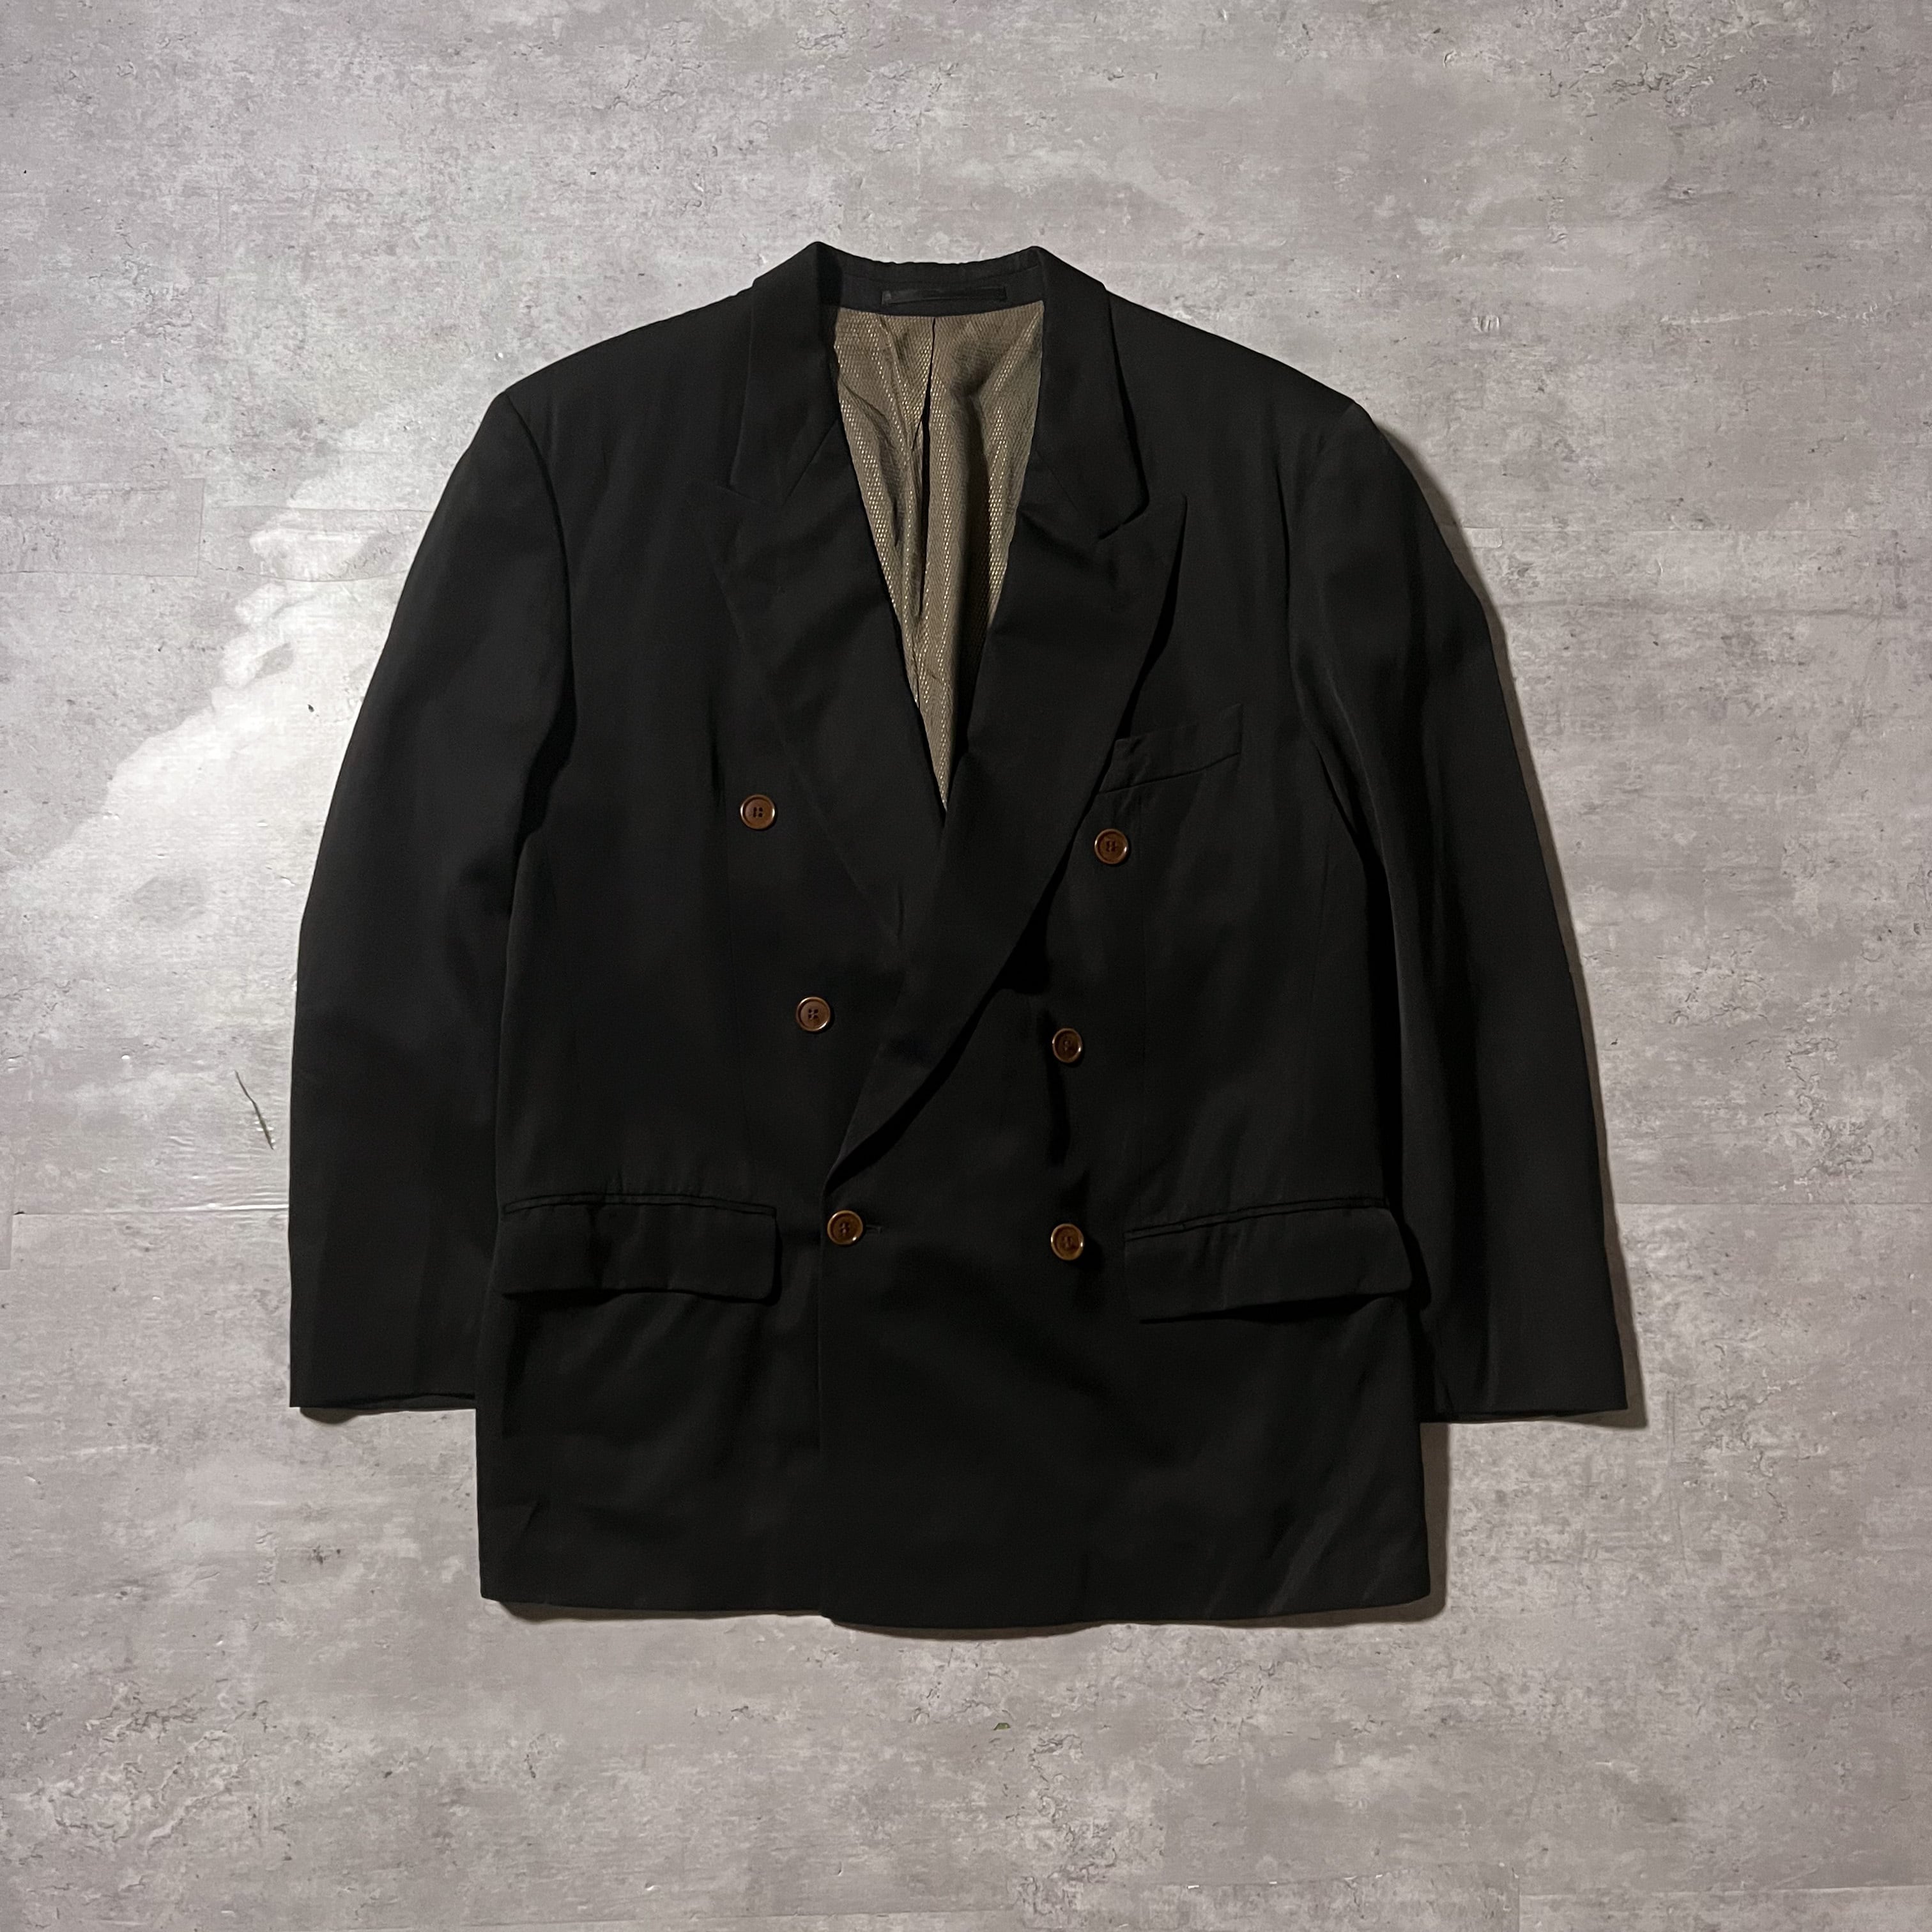 80s “BOSS HUGO BOSS” double tailored jacket made in Germany 80年代 